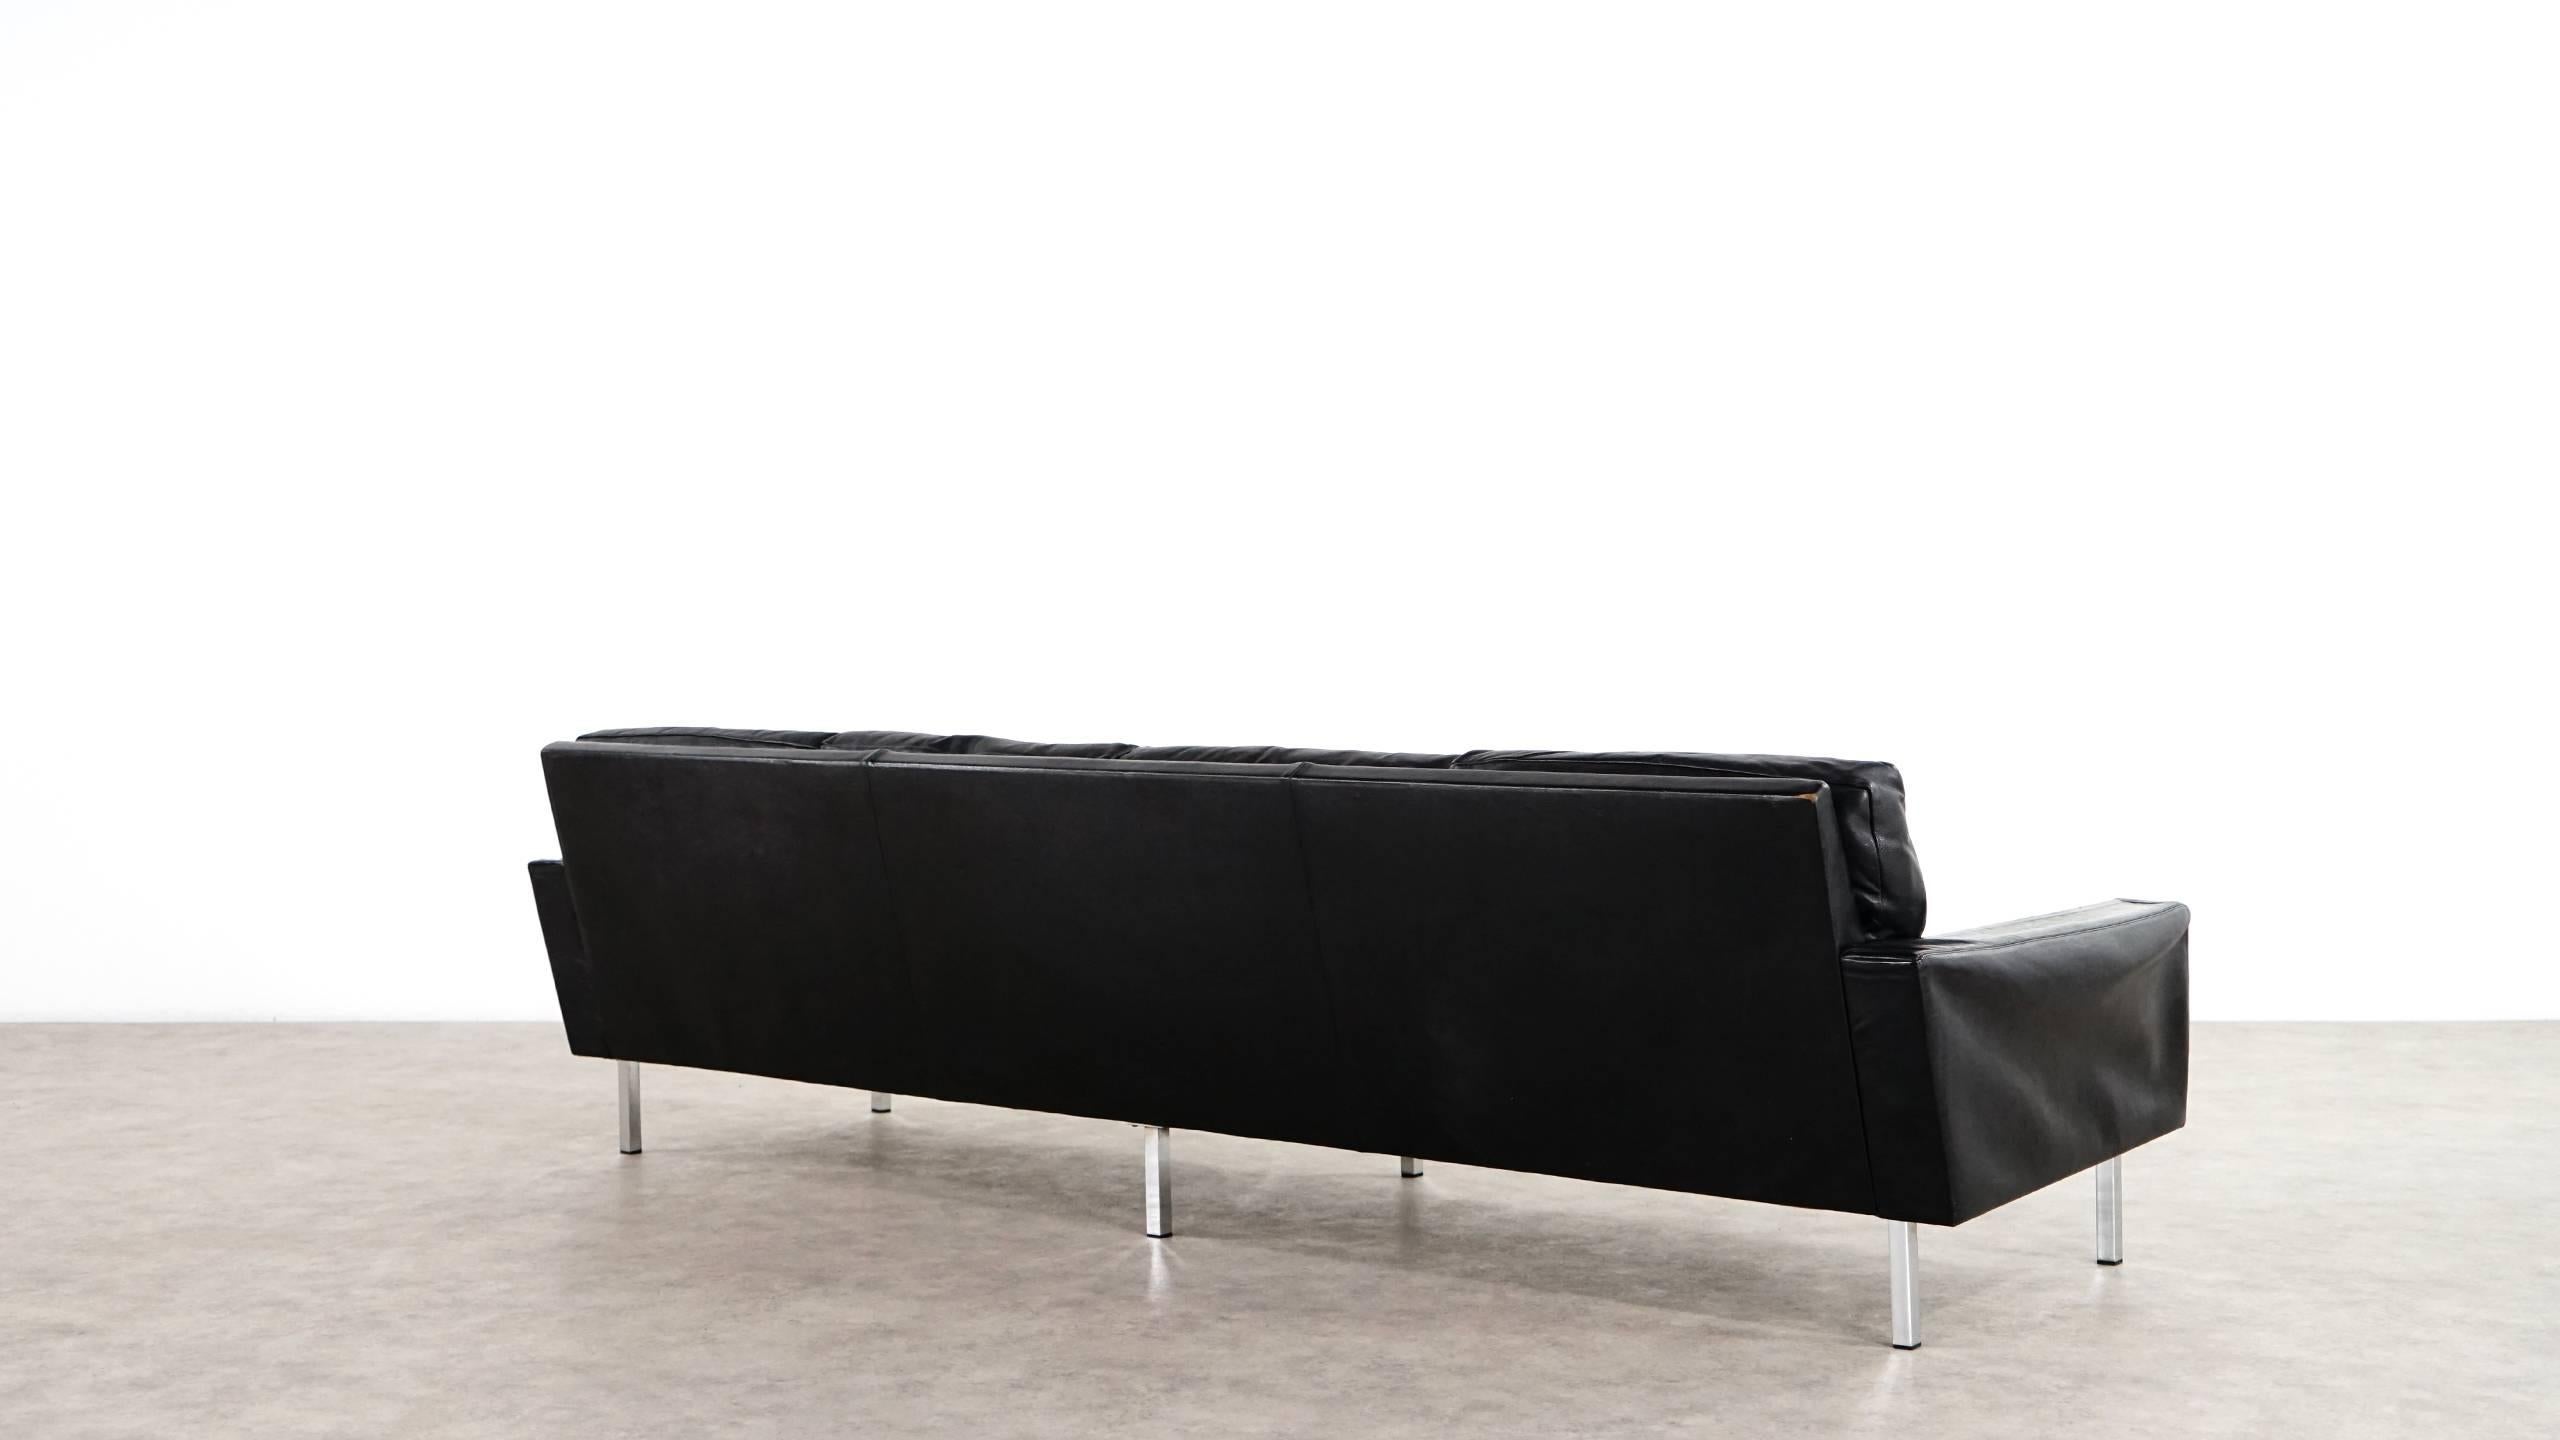 Rare four-seat loose cushion sofa by George Nelson.

Black leather, large four-seat, freestanding, nice vintage condition with fantastic patina. Leather cushions with down filling.